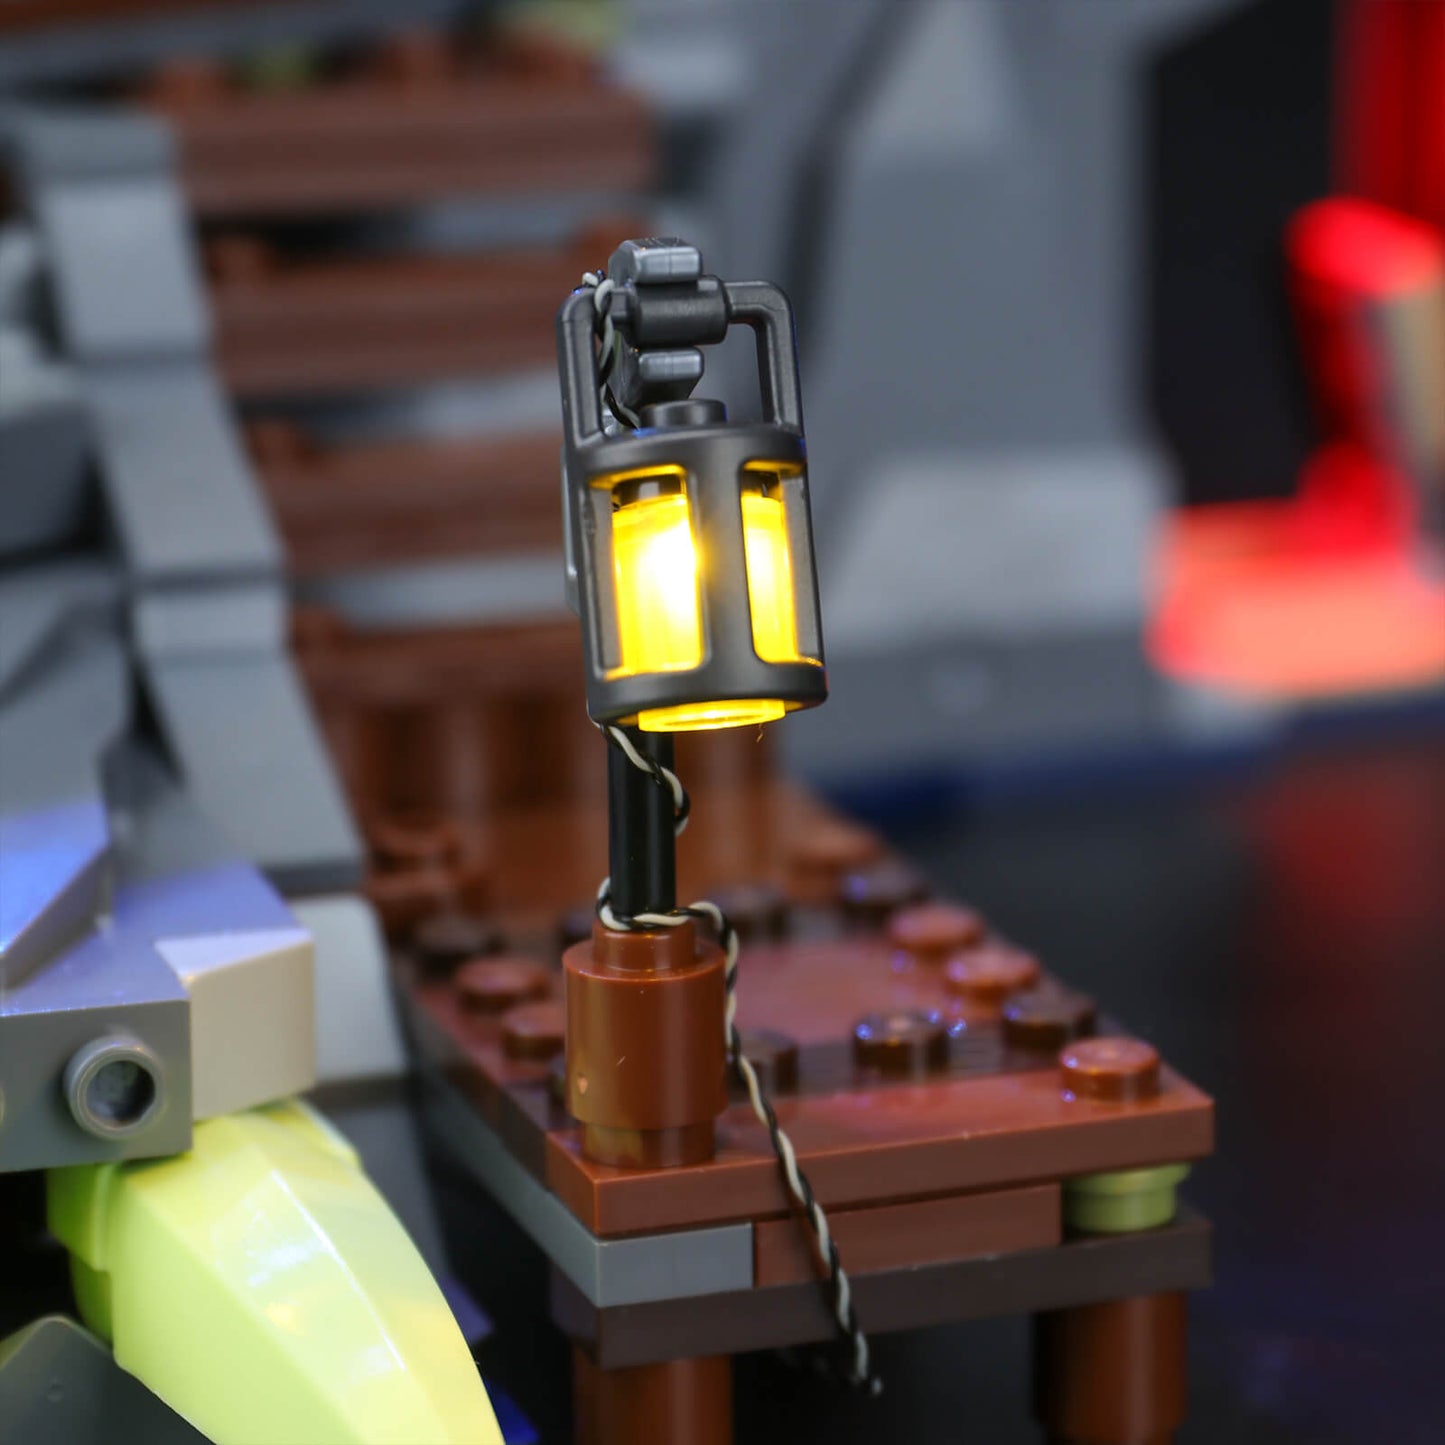 Light Kit For The Lighthouse of Darkness 70431